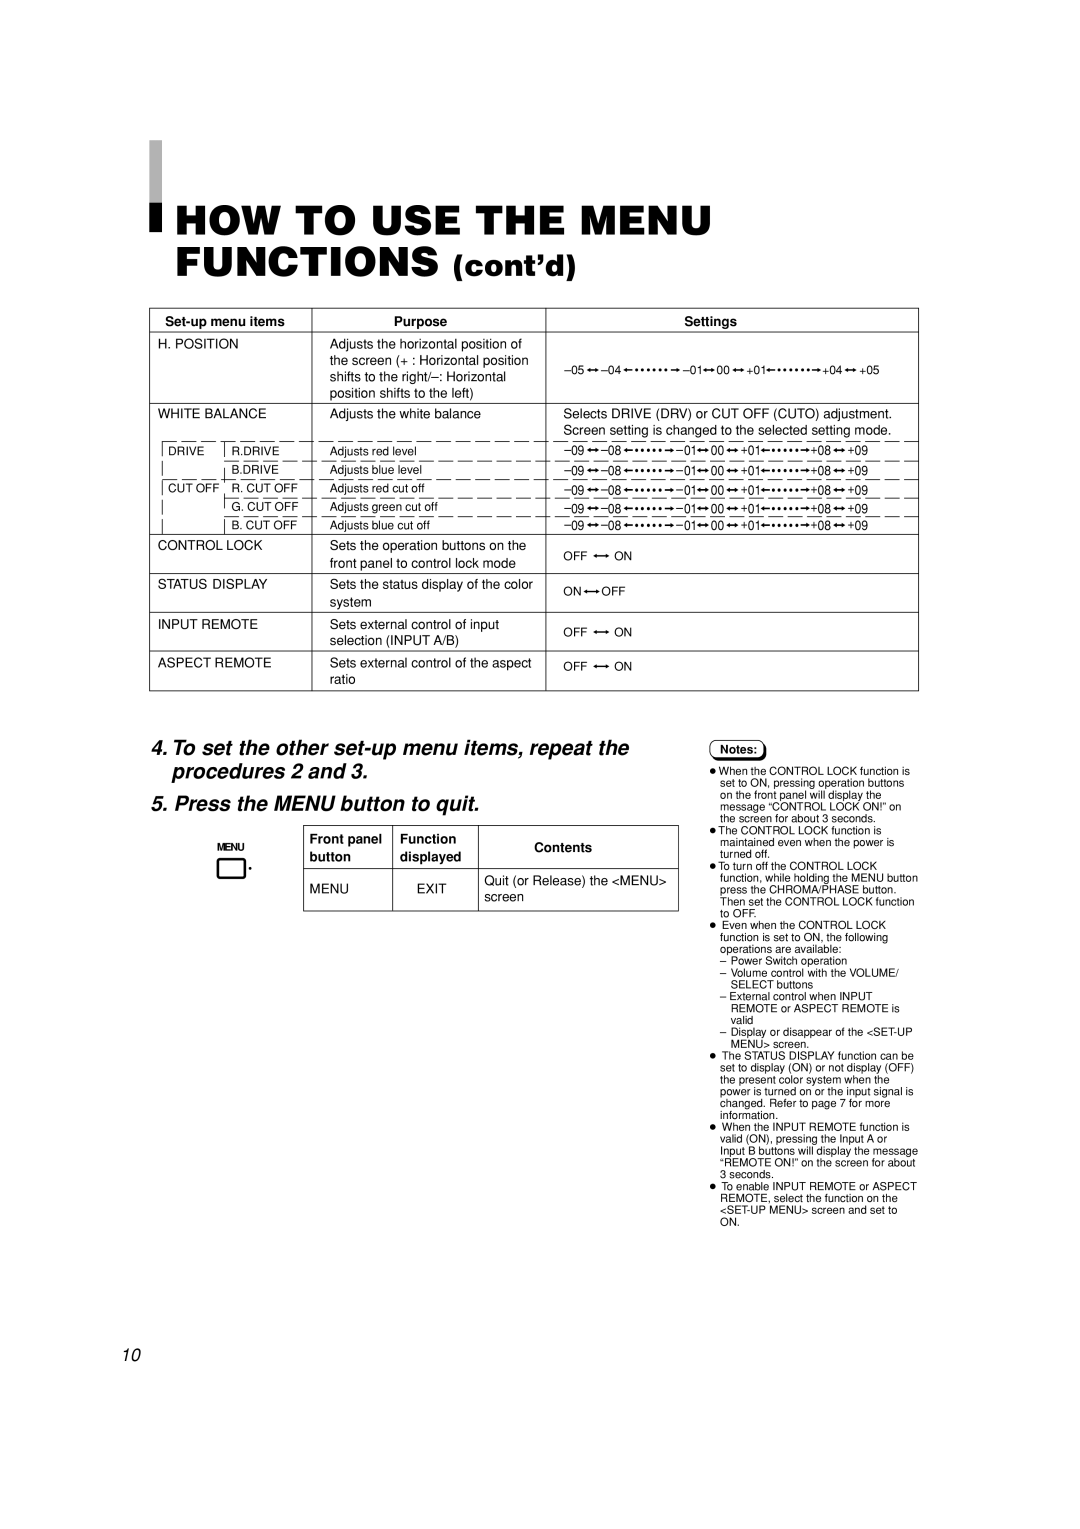 JVC TM-A101G manual HOW TO USE THE MENU FUNCTIONS cont’d, To set the other set-up menu items, repeat the procedures 2 and 